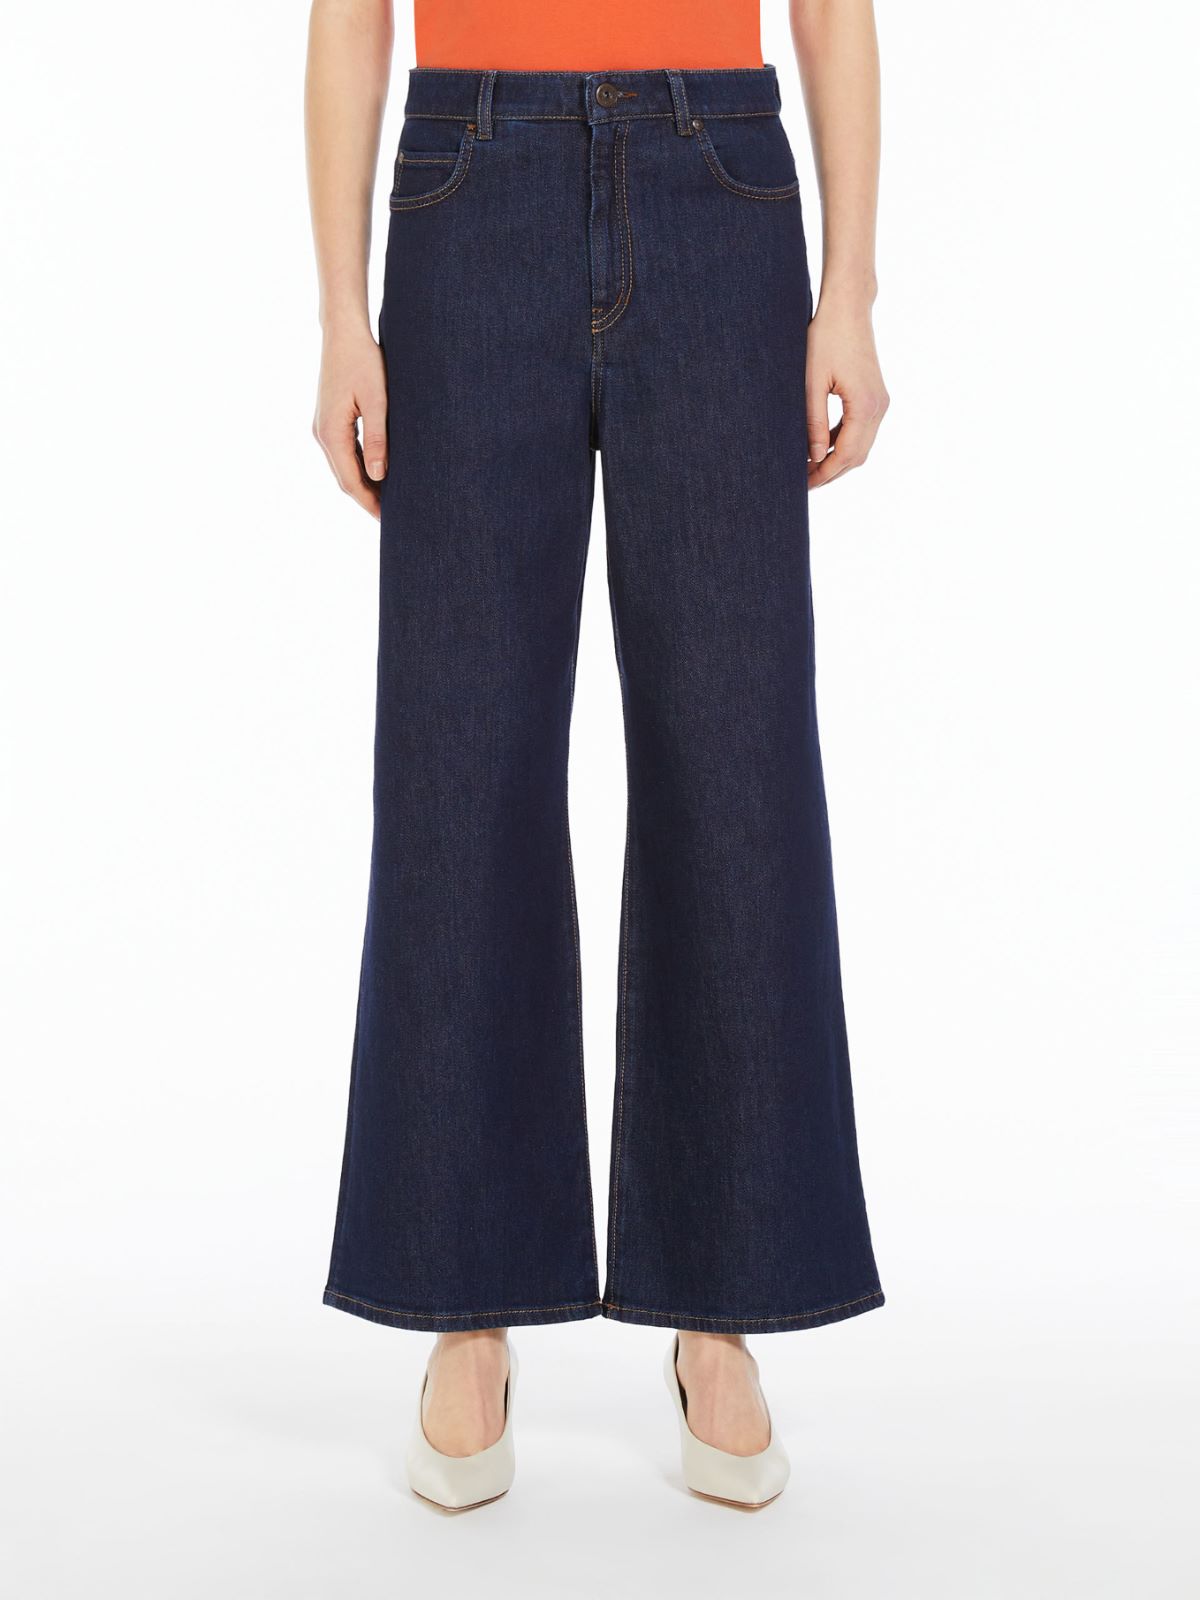 Relaxed-fit comfortable denim jeans, navy | Weekend Max Mara